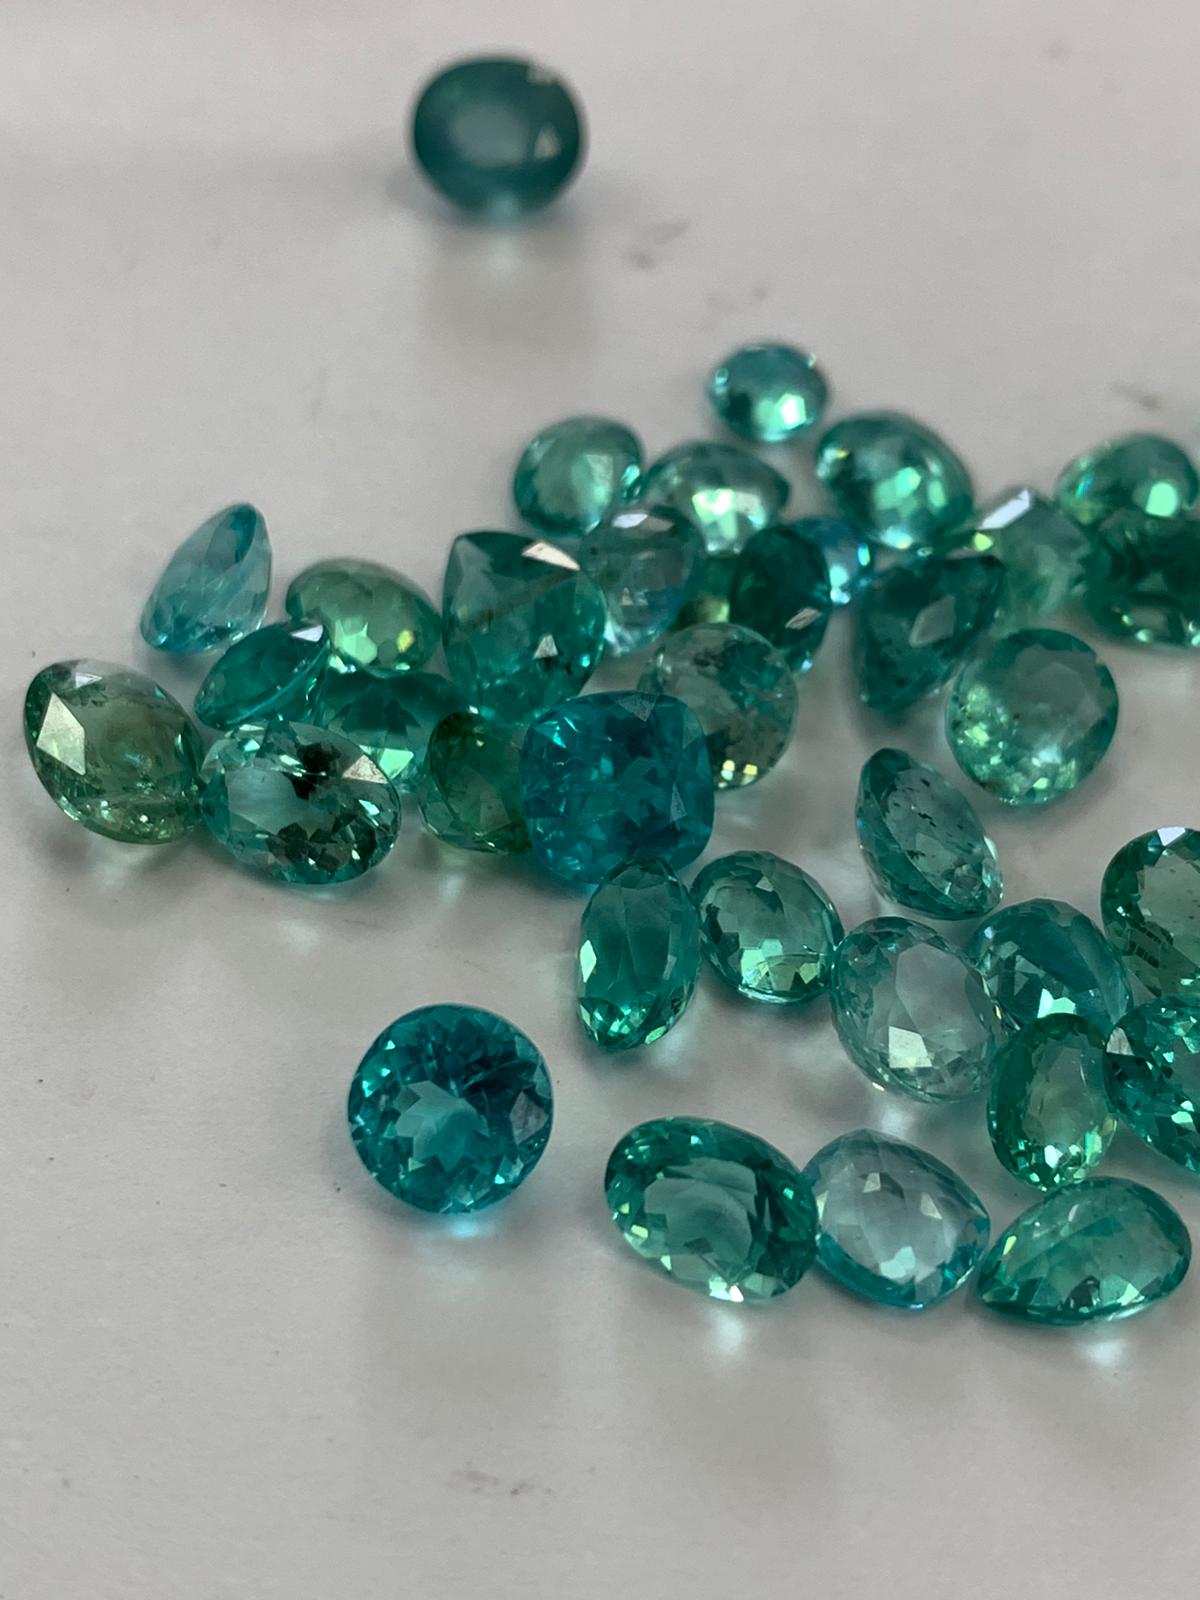 Loose apatite for sale near by you